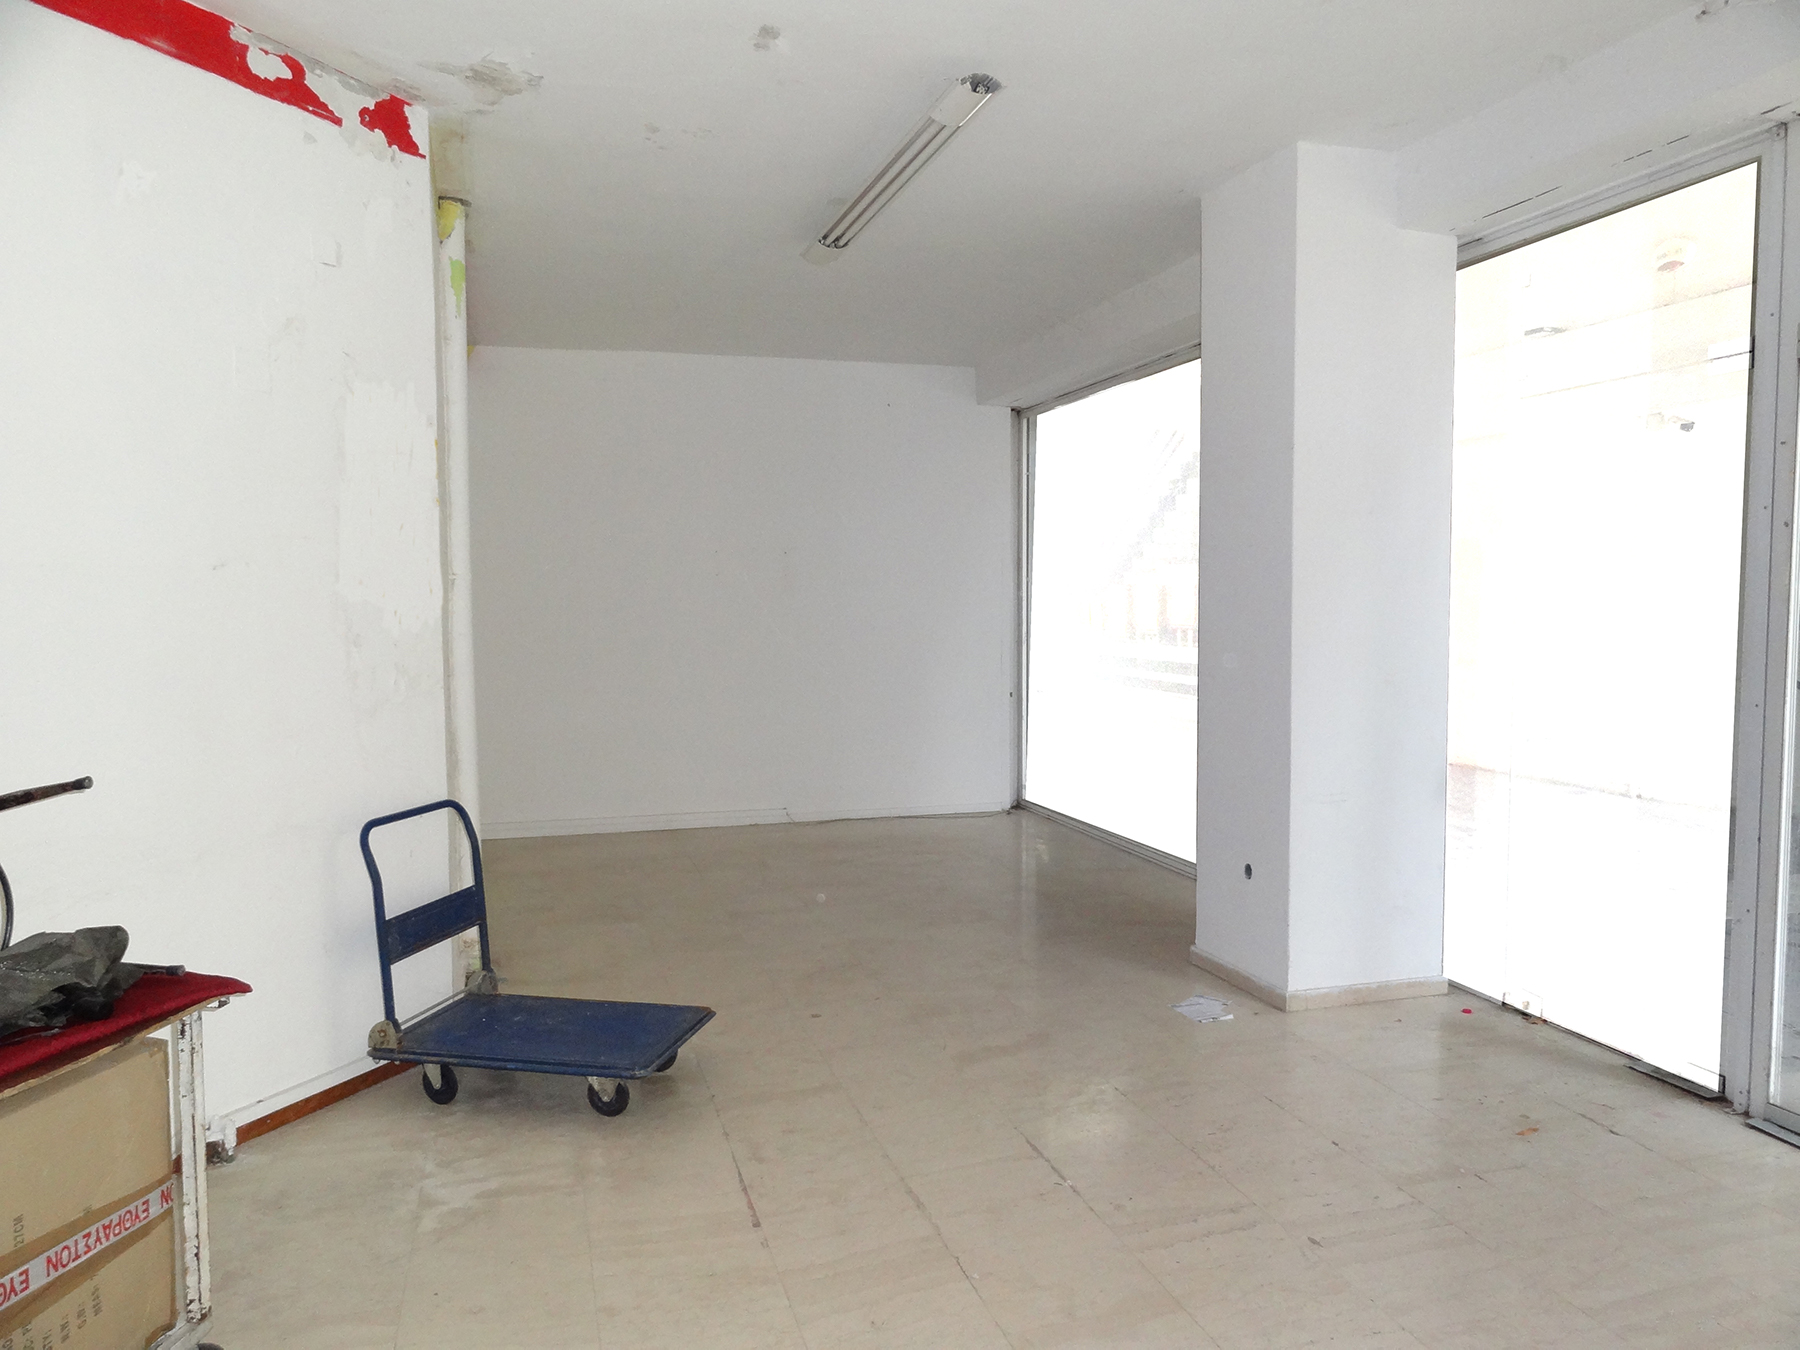 Ground floor commercial space for rent, 50 sq.m. at the most central point of Ioannina